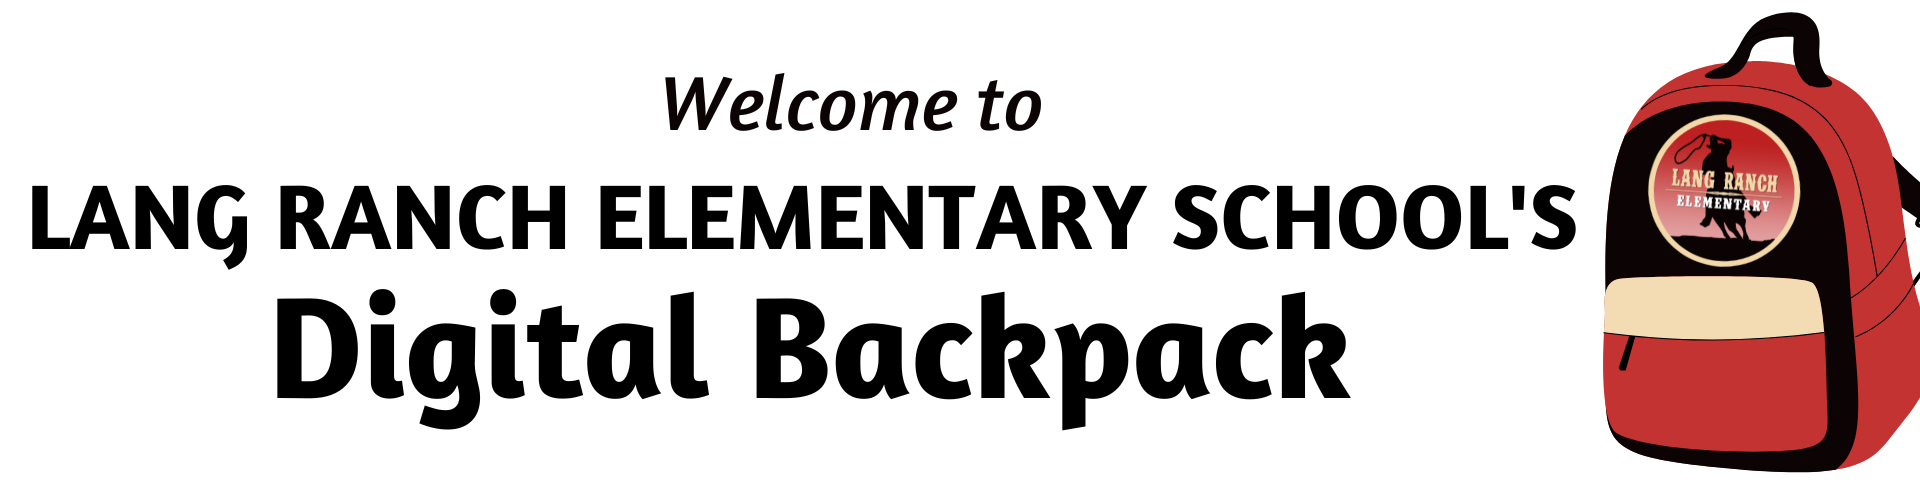 Welcome to Lang Ranch Elementary School's Digital Backpack